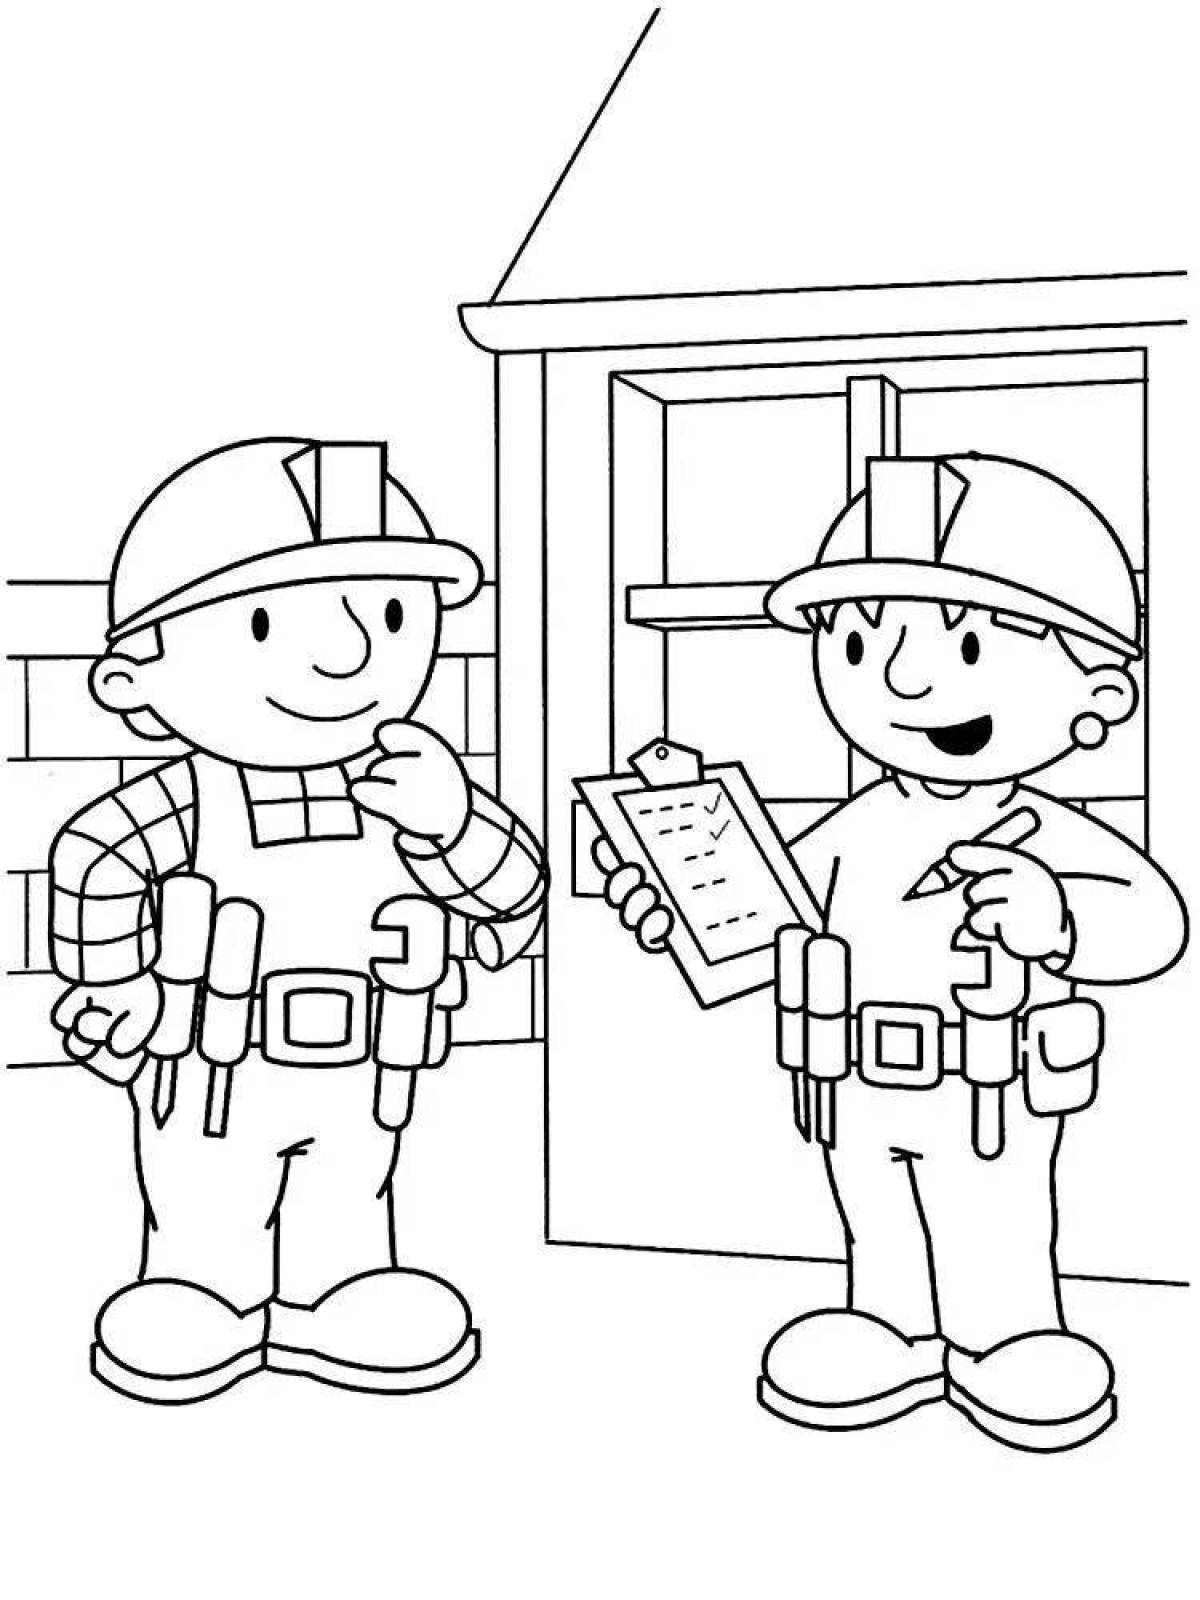 Occupational Safety and Health Bright Coloring Page